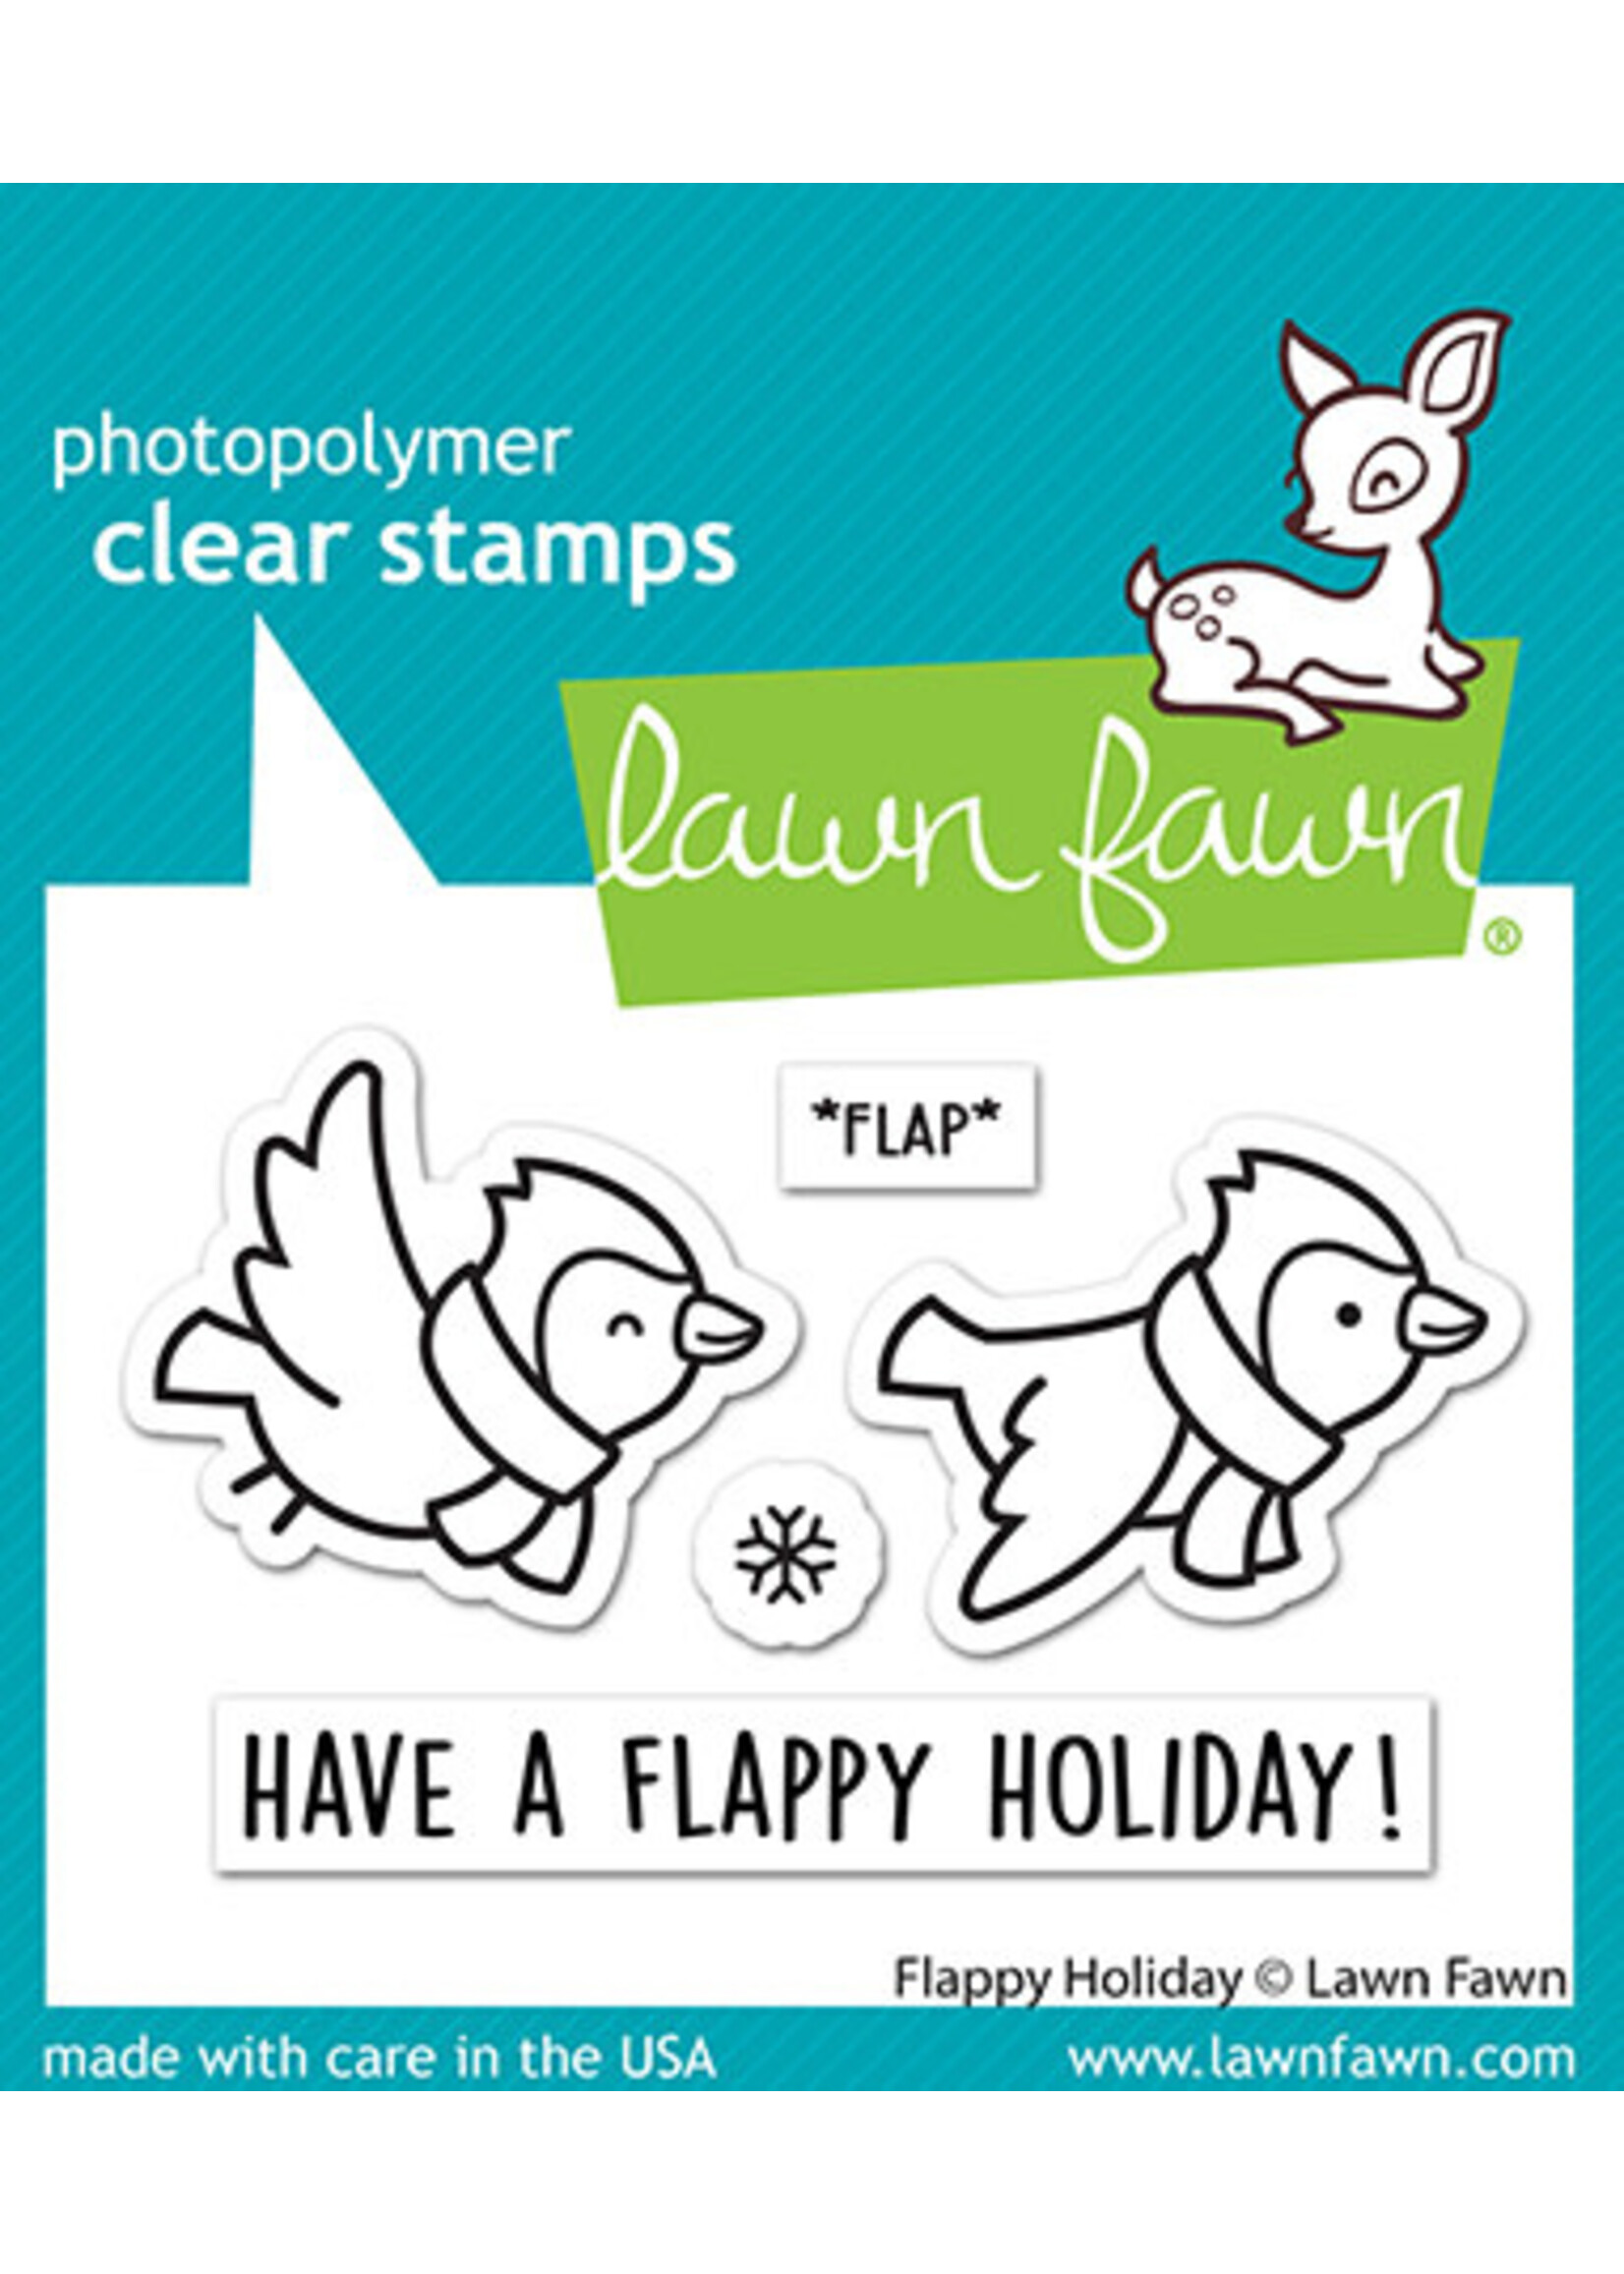 Lawn Fawn flappy holiday stamp